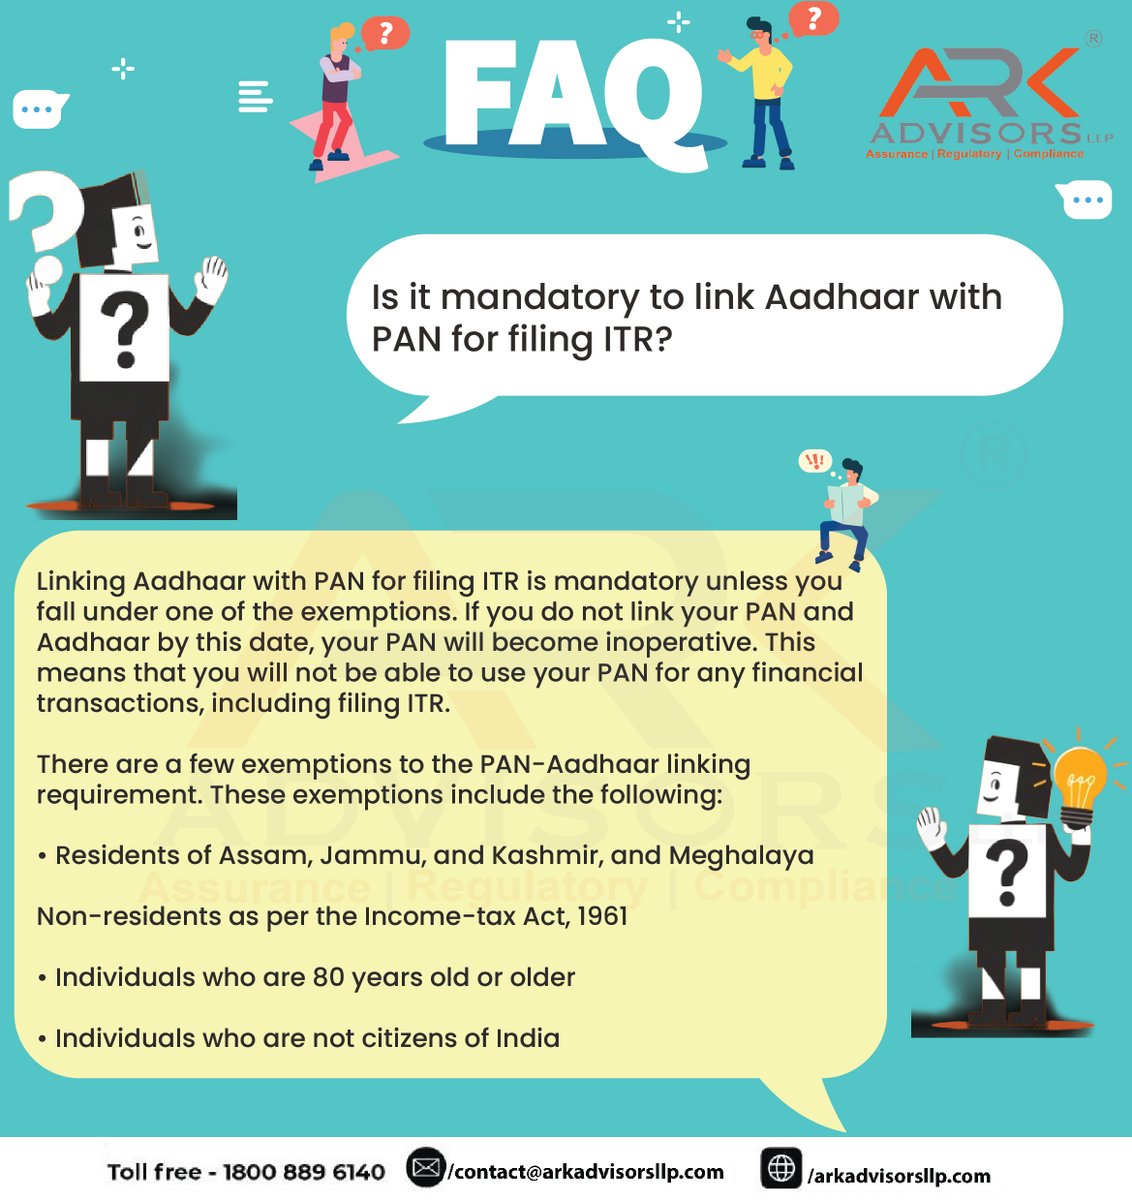 Reminder: Don't forget to link your Aadhaar with PAN for smooth ITR filing. Exceptions apply, so check now! 💼💳 

.

.

.

.

.

.

.

#TaxFiling #IncomeTax #AadhaarLinking #PANCard #FinanceTips #DeadlineAlert #TaxFiling #IncomeTax #AadhaarLinking #PANCard #FinanceTips